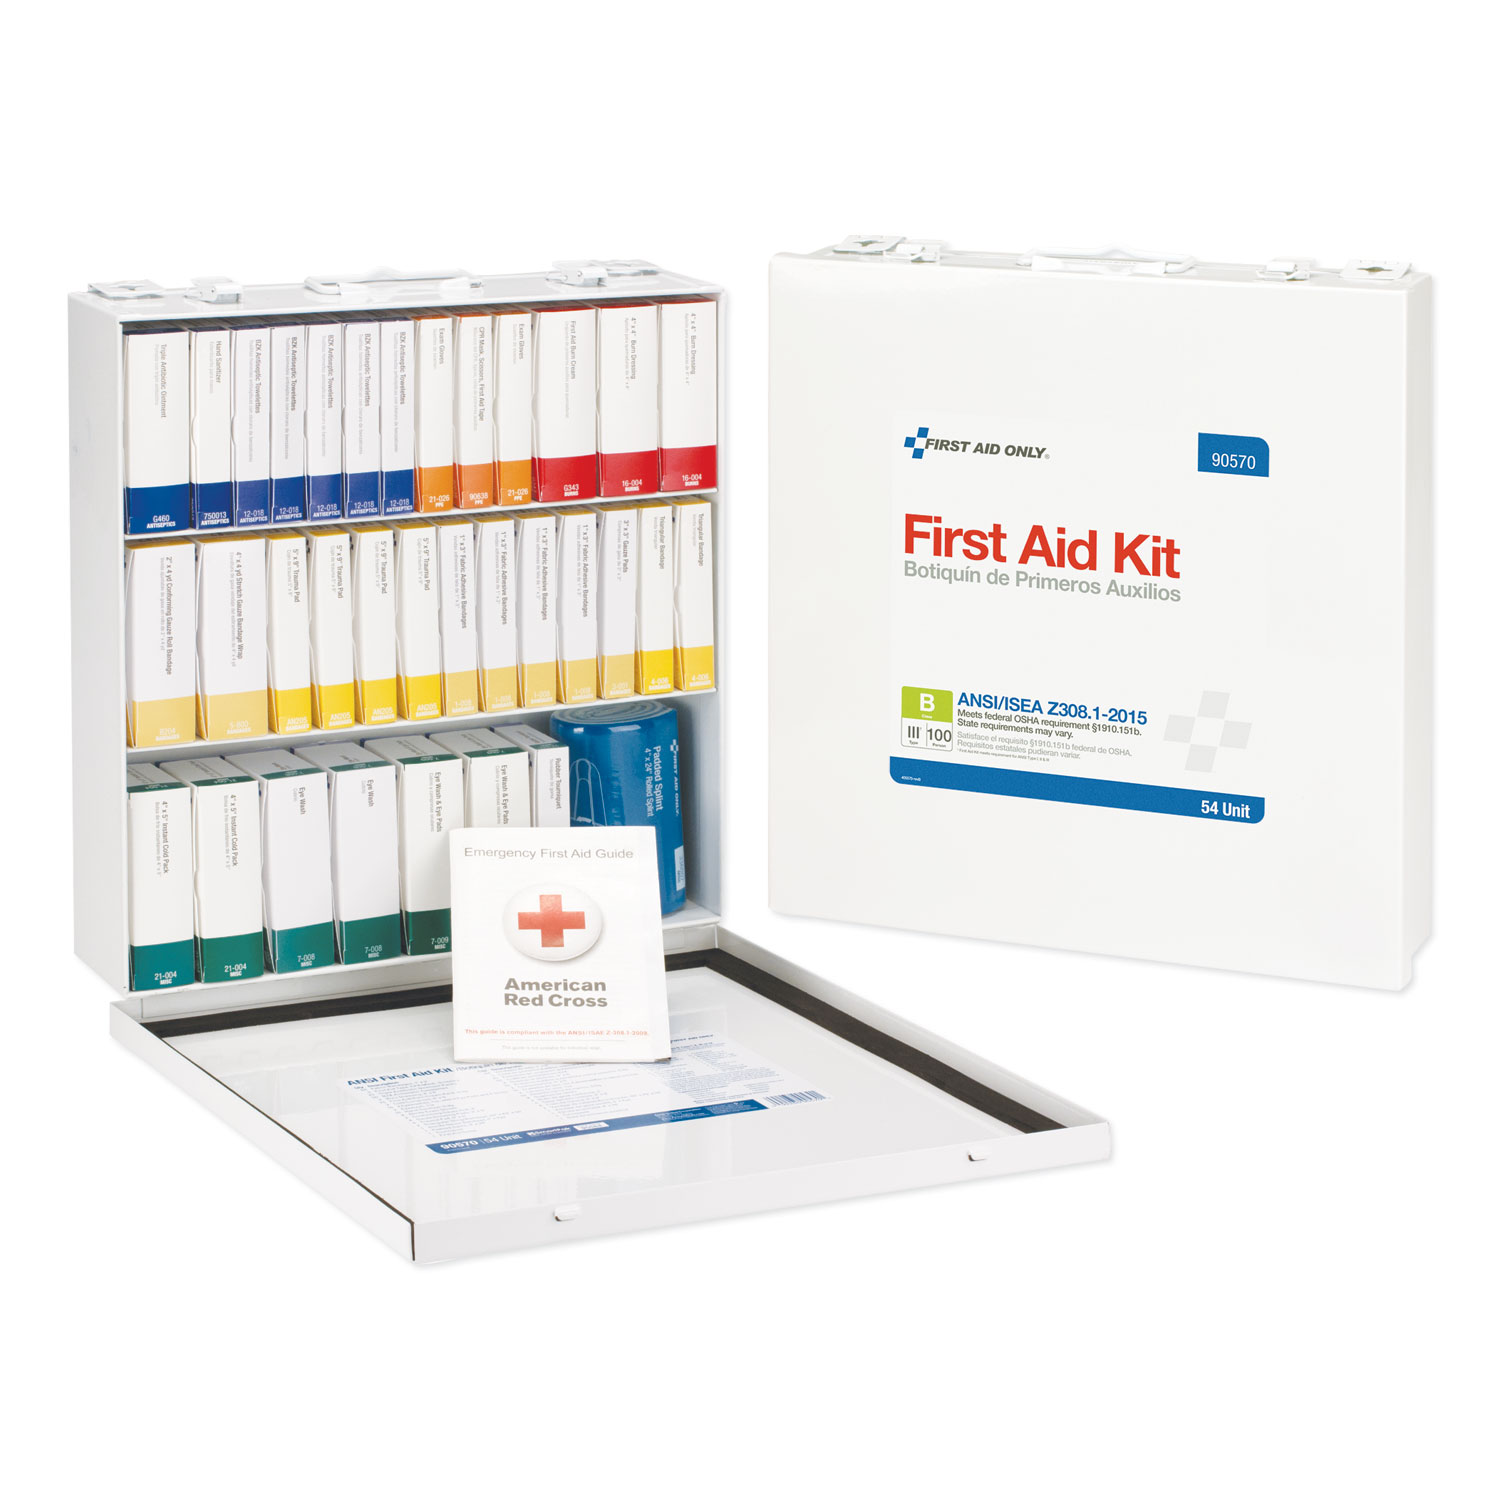  First Aid Only 90570 Unitized ANSI Compliant Class B Type III First Aid Kit for 100 People, 54 Units (FAO90570) 